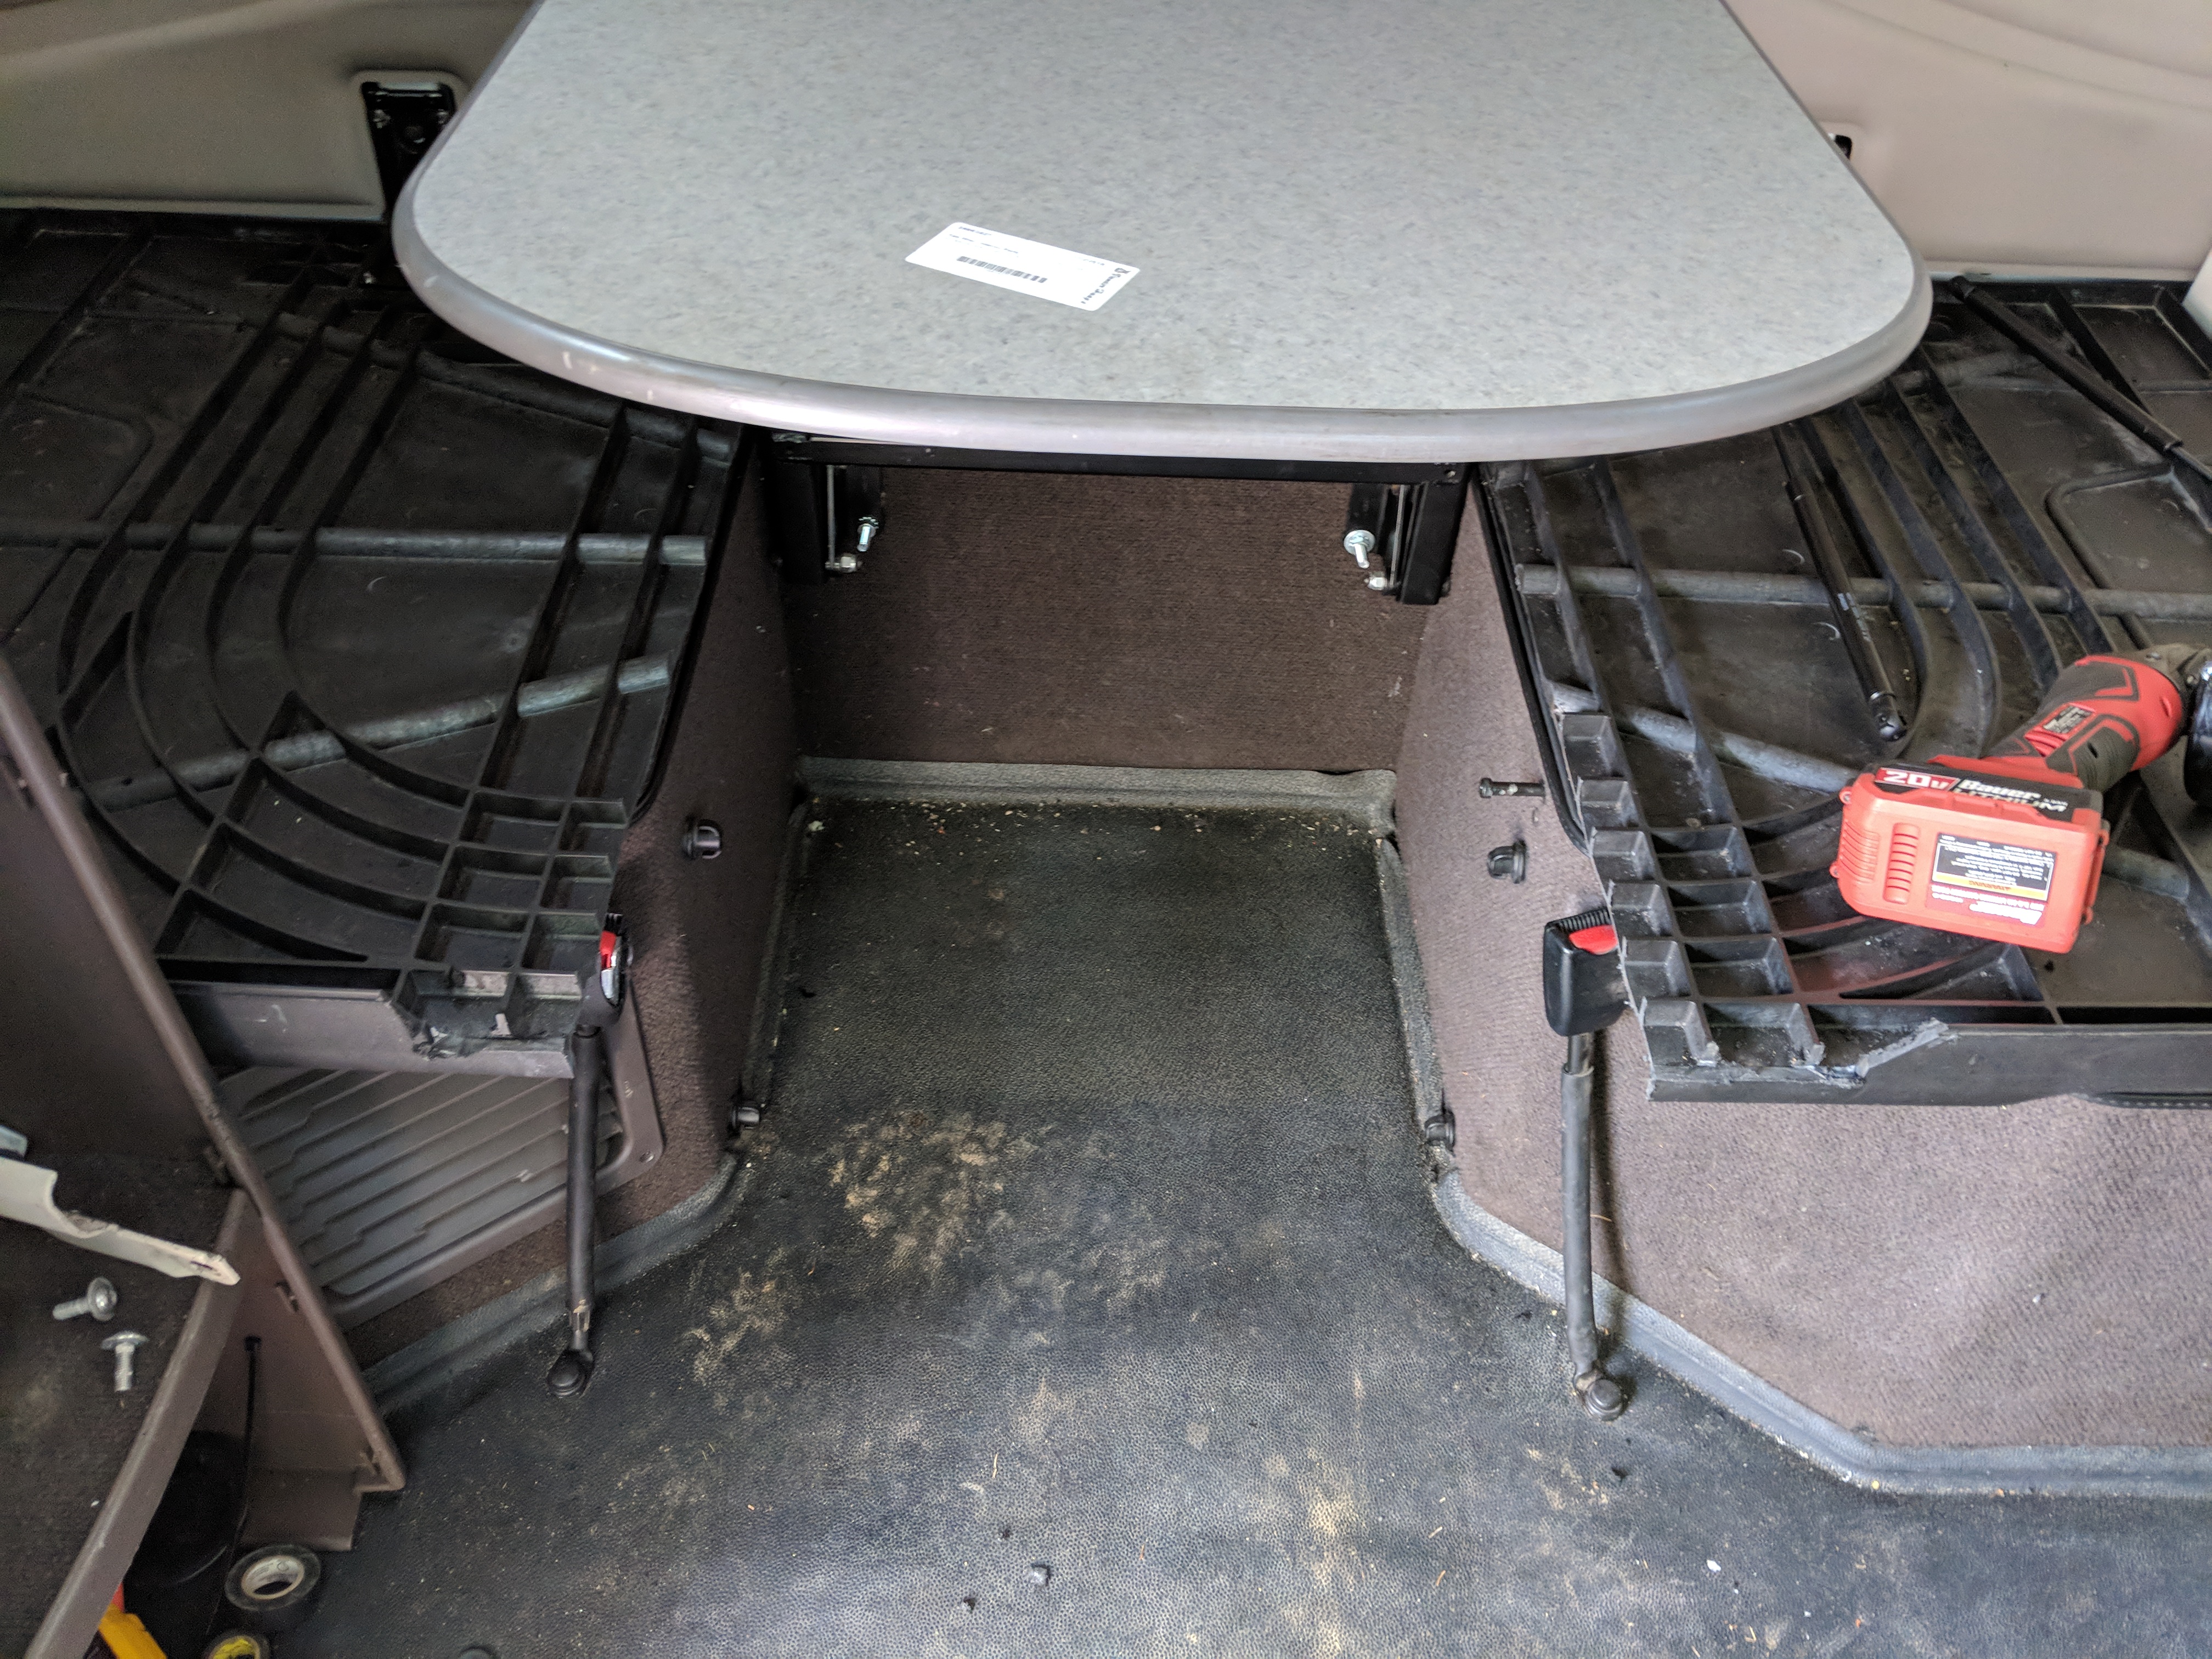 Converting the bottom sleeper to a dinette